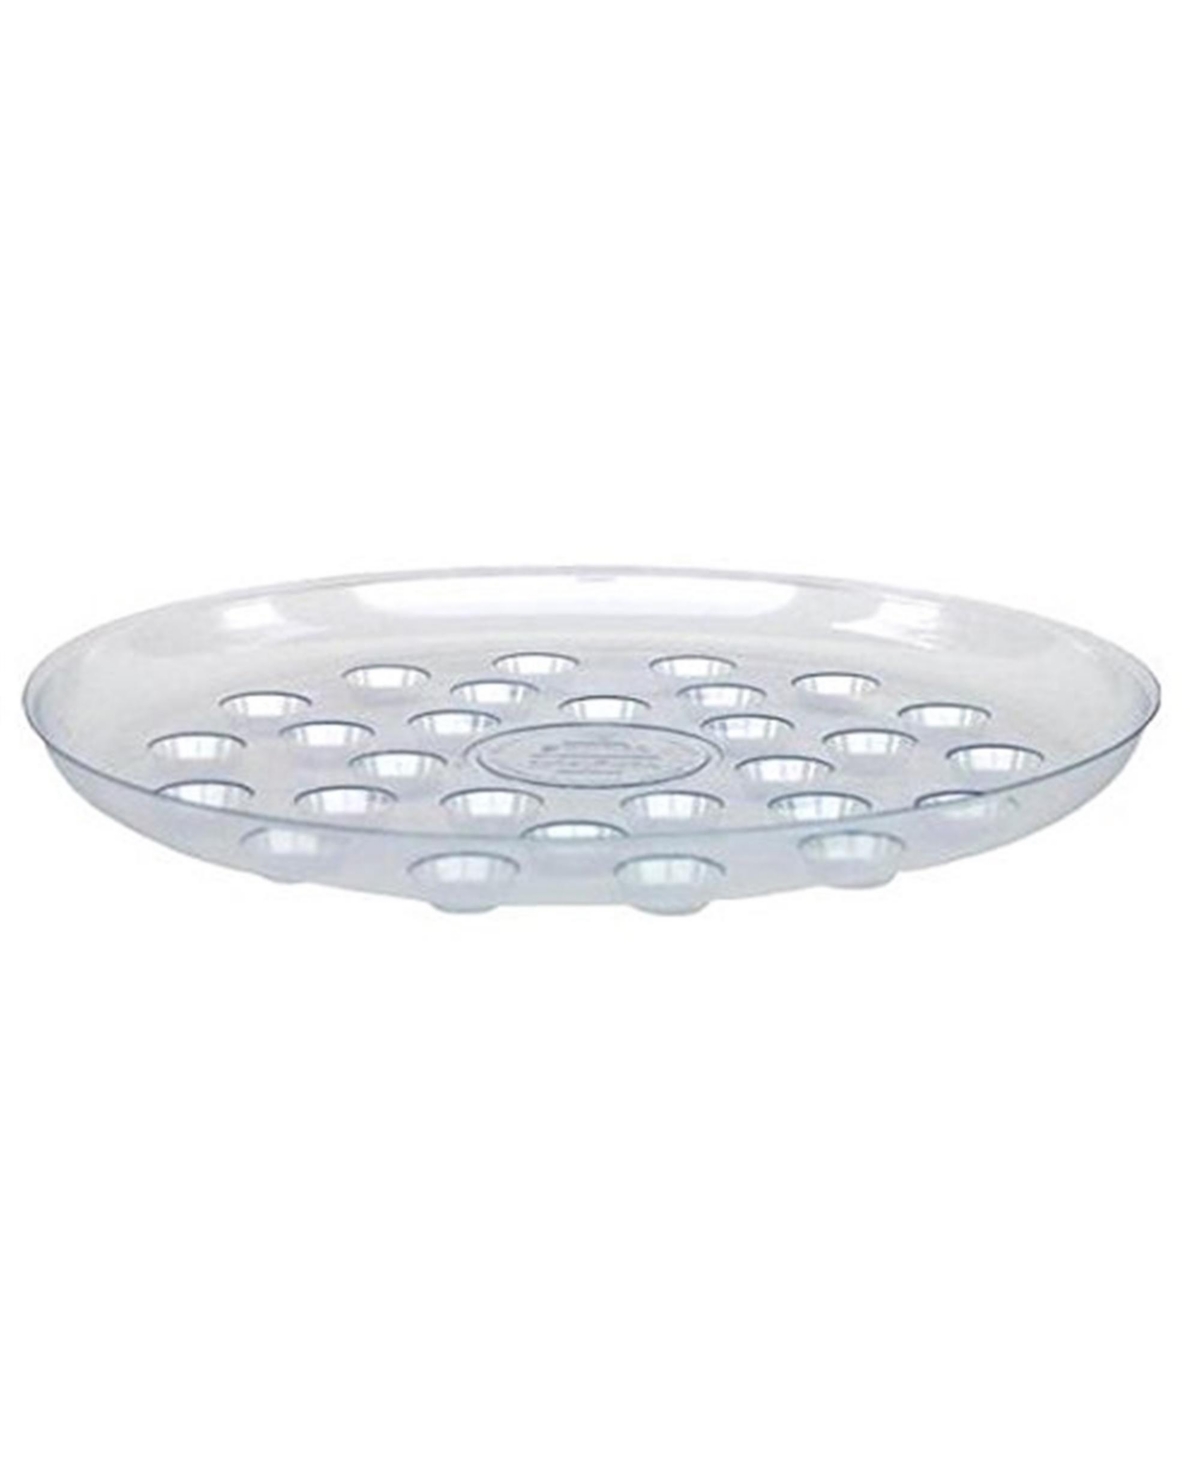 Ds-1600 Heavy Gauge Footed Carpet Saver Saucer, 16-Inch, Clear - Clear